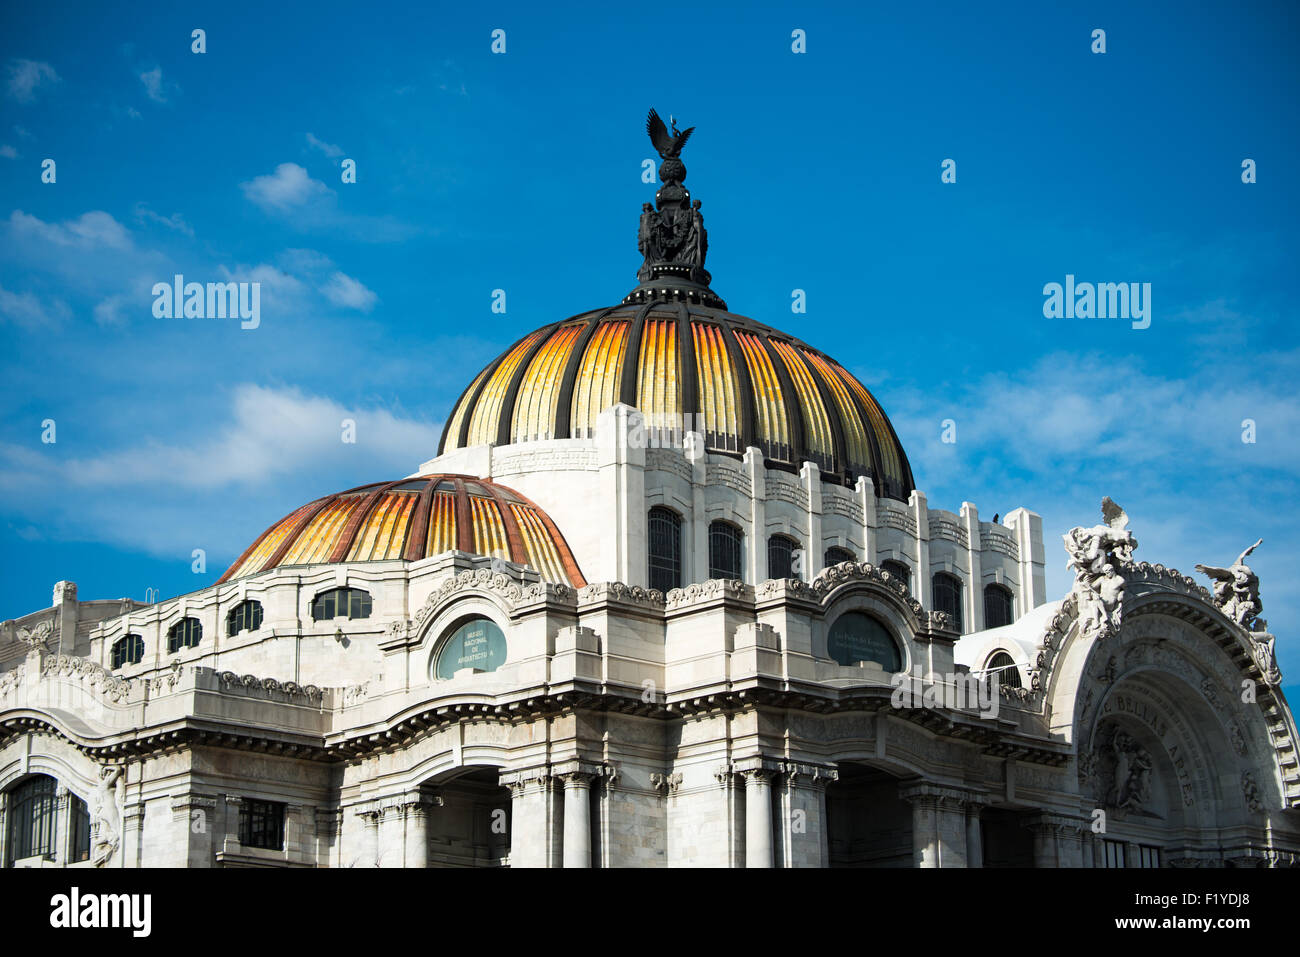 MEXICO CITY, Mexico — The Palacio de Bellas Artes (Palace of Fine Arts) is Mexico's most important cultural center. It's located on the end of Alameda Central park close to the Zocalo in Centro Historico. The building was completed in 1934 and features a distinctive tiled roof on the domes. Stock Photo